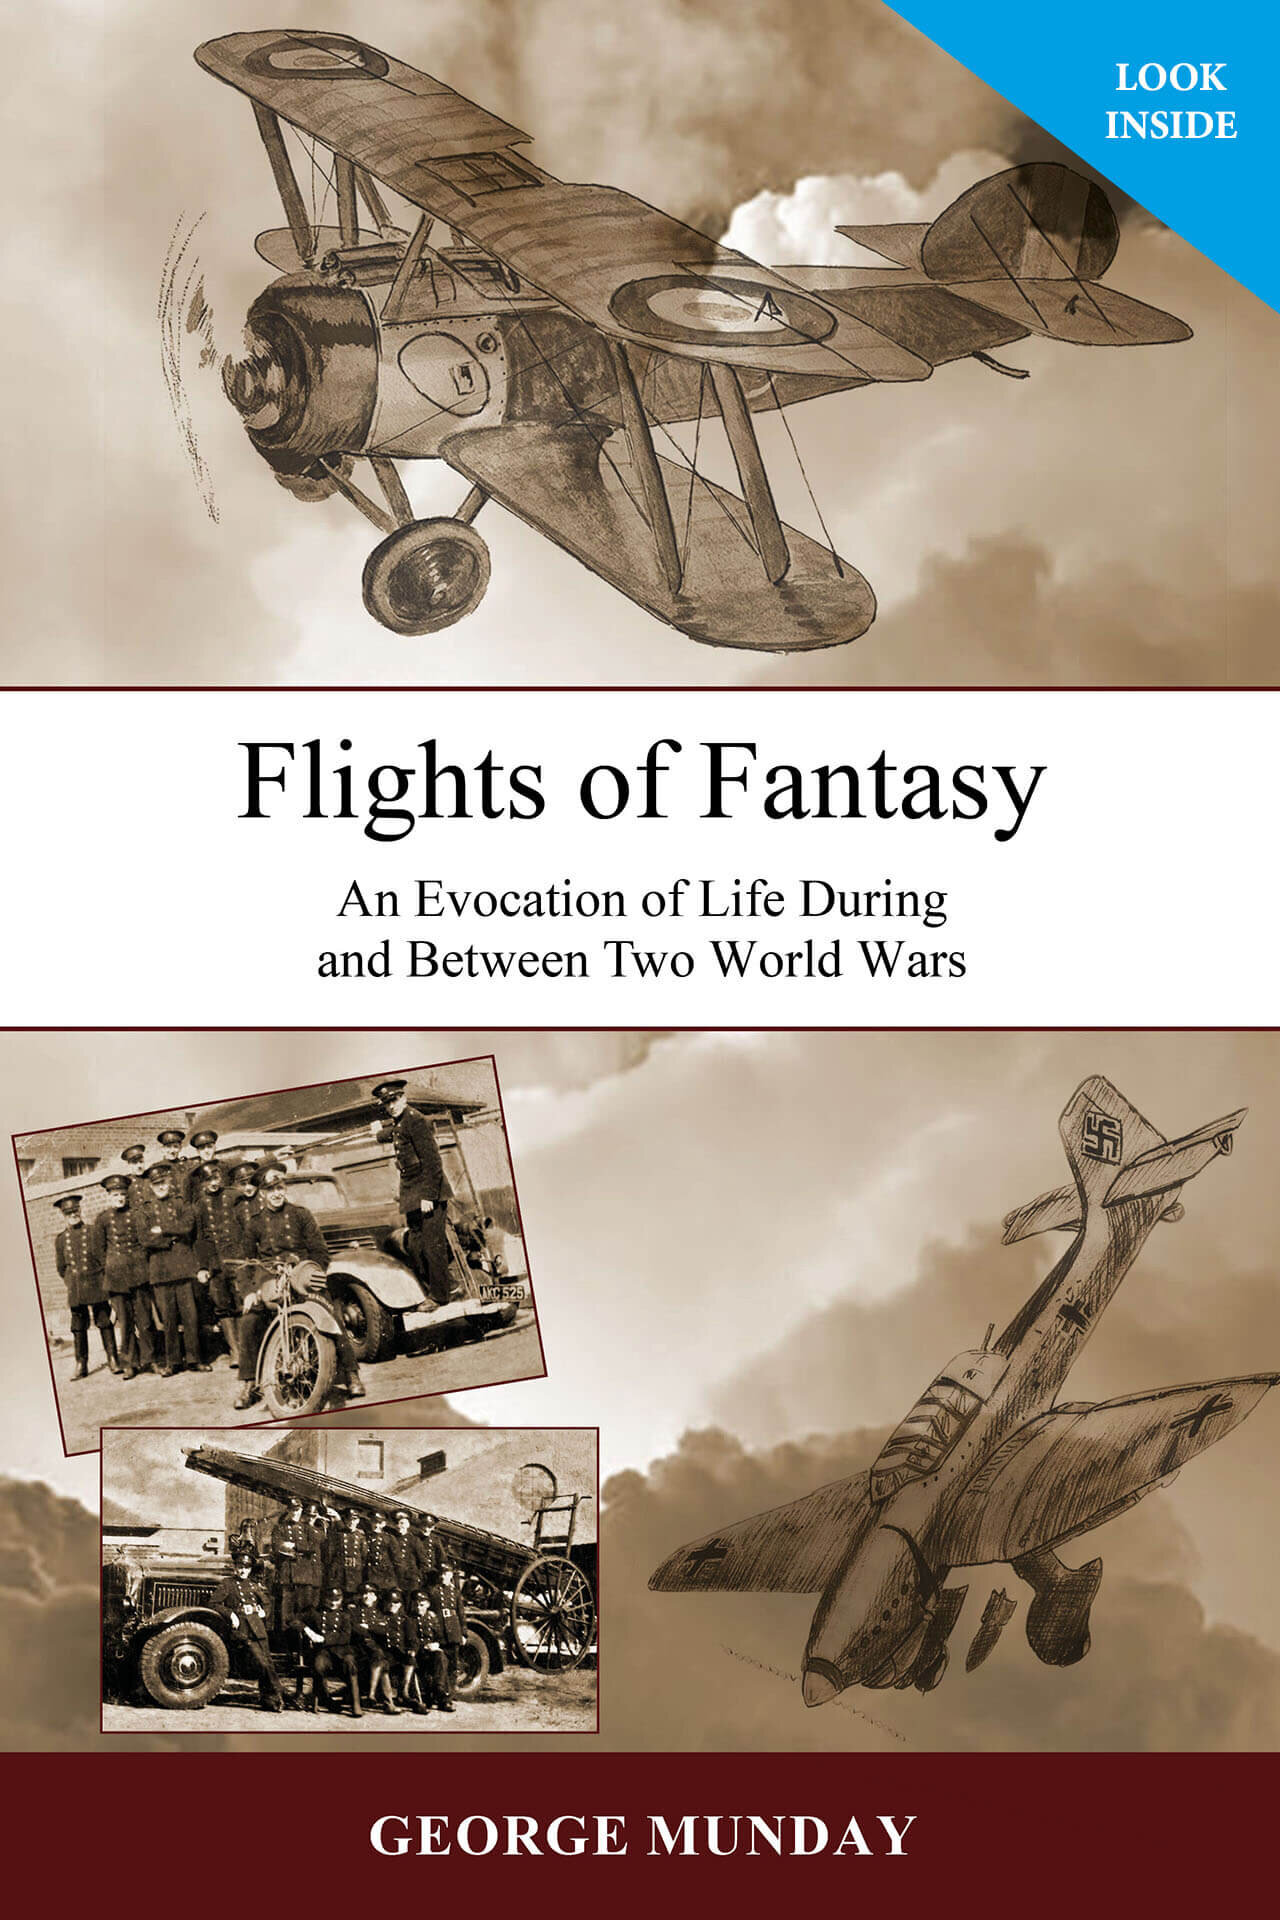 Flights of Fantasy, An Evocation of Life During and Between Two World Wars | by George Munday